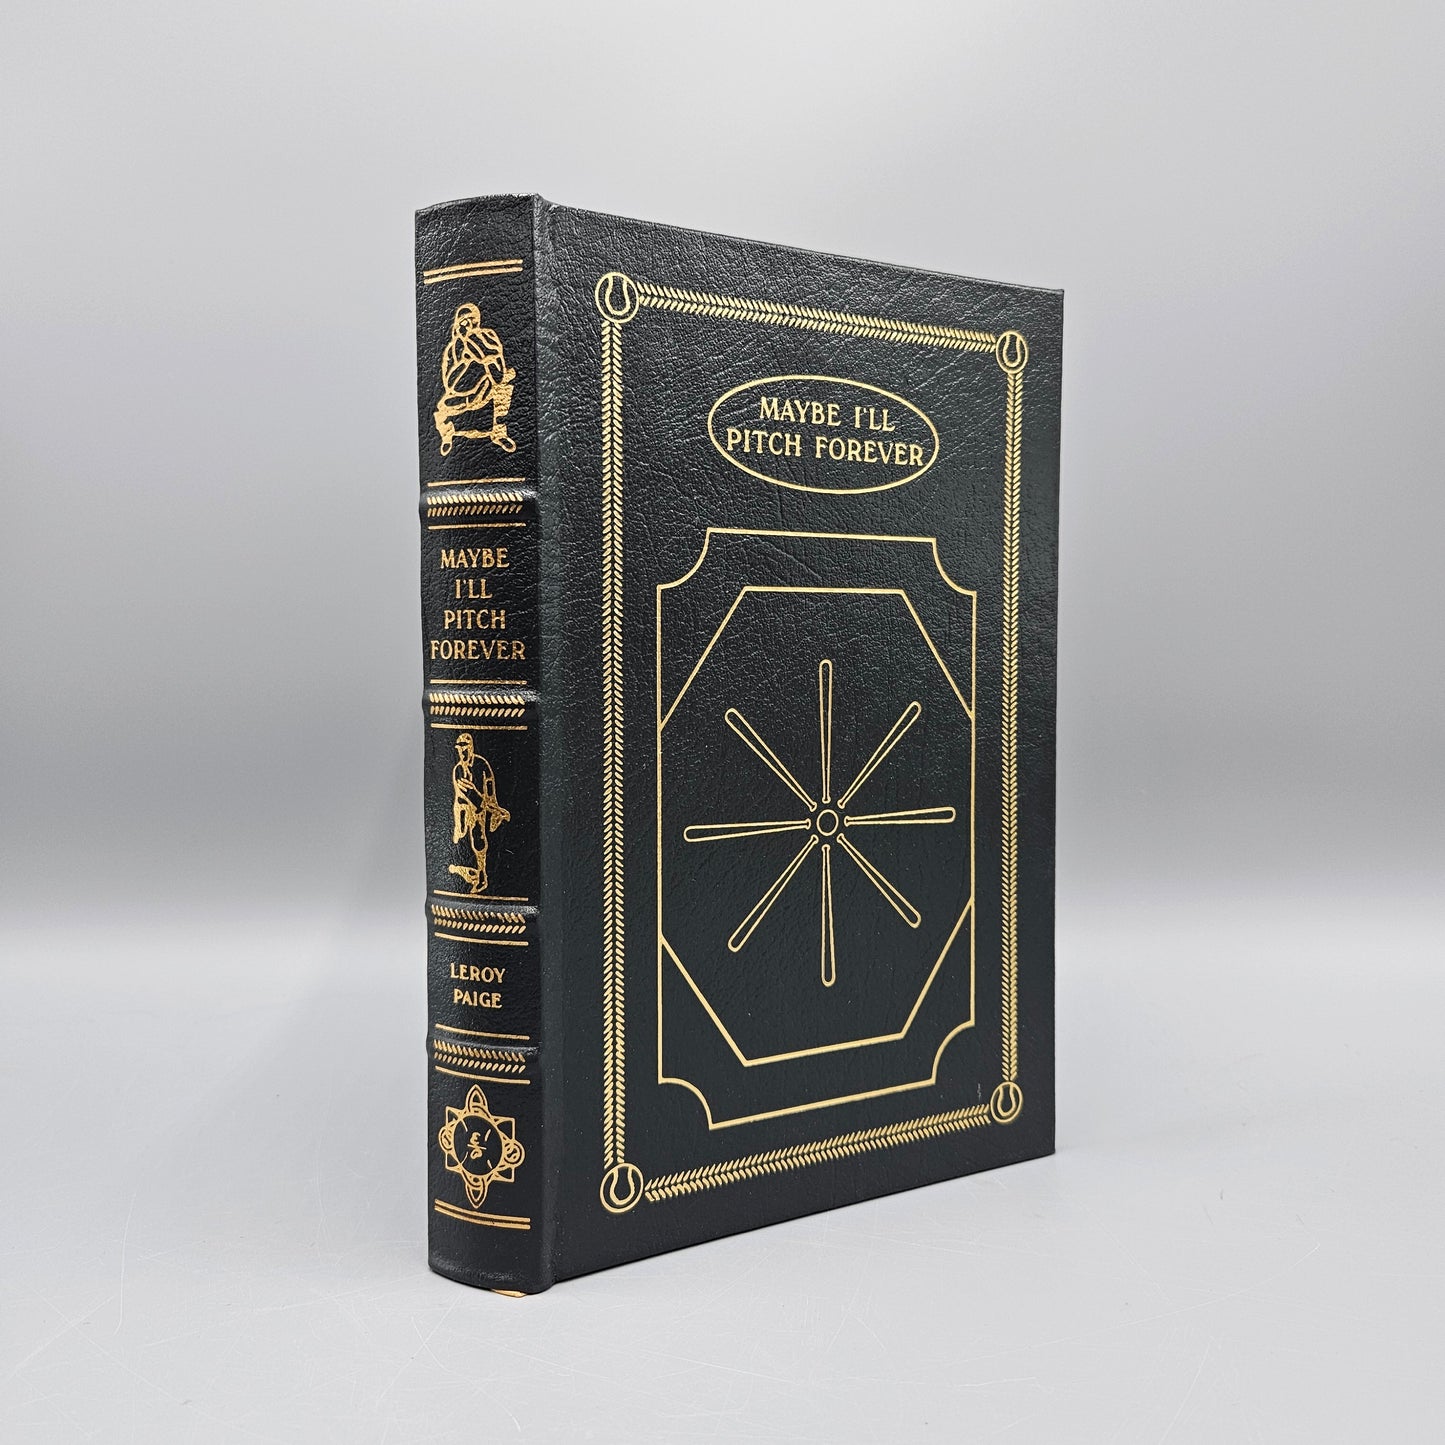 Leatherbound Book - Stachel Paige "Maybe I'll Pitch Forever" Easton Press